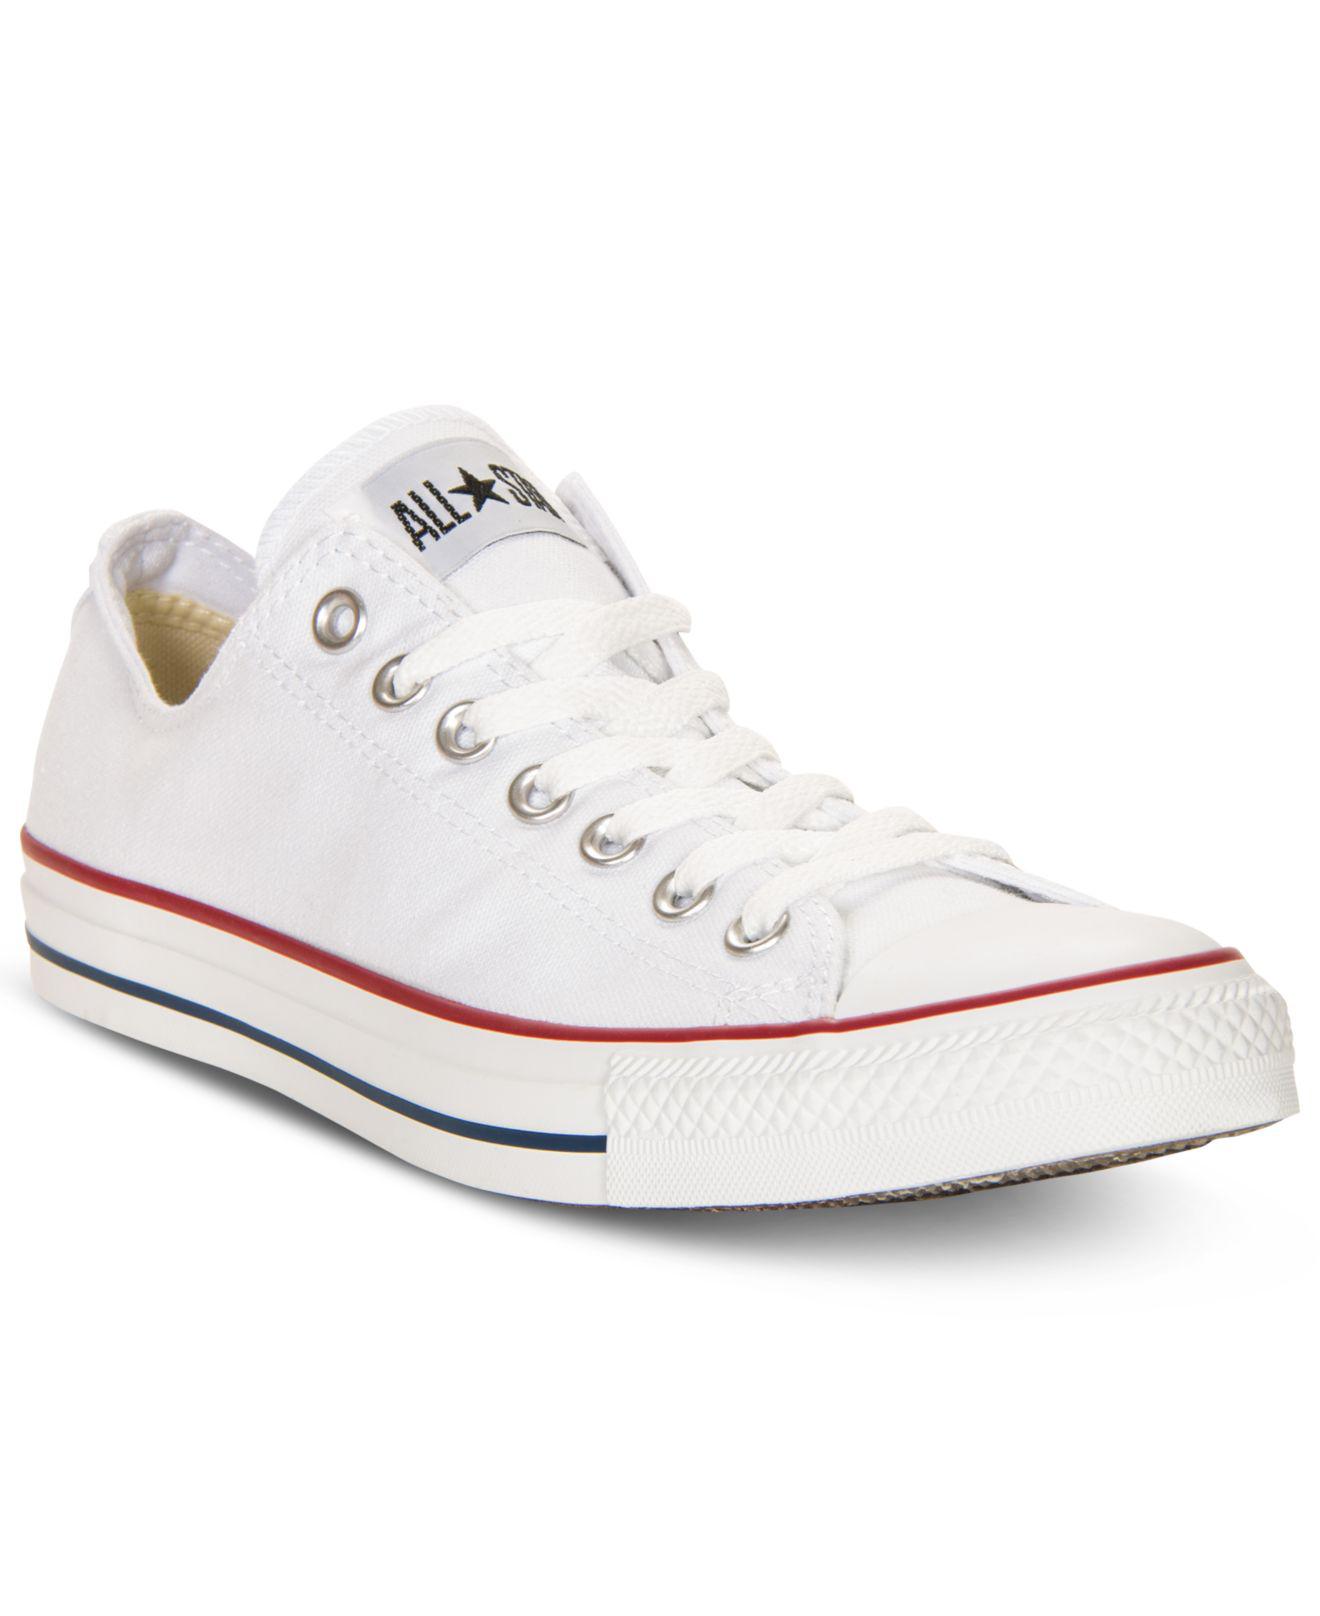 white on white converse low tops